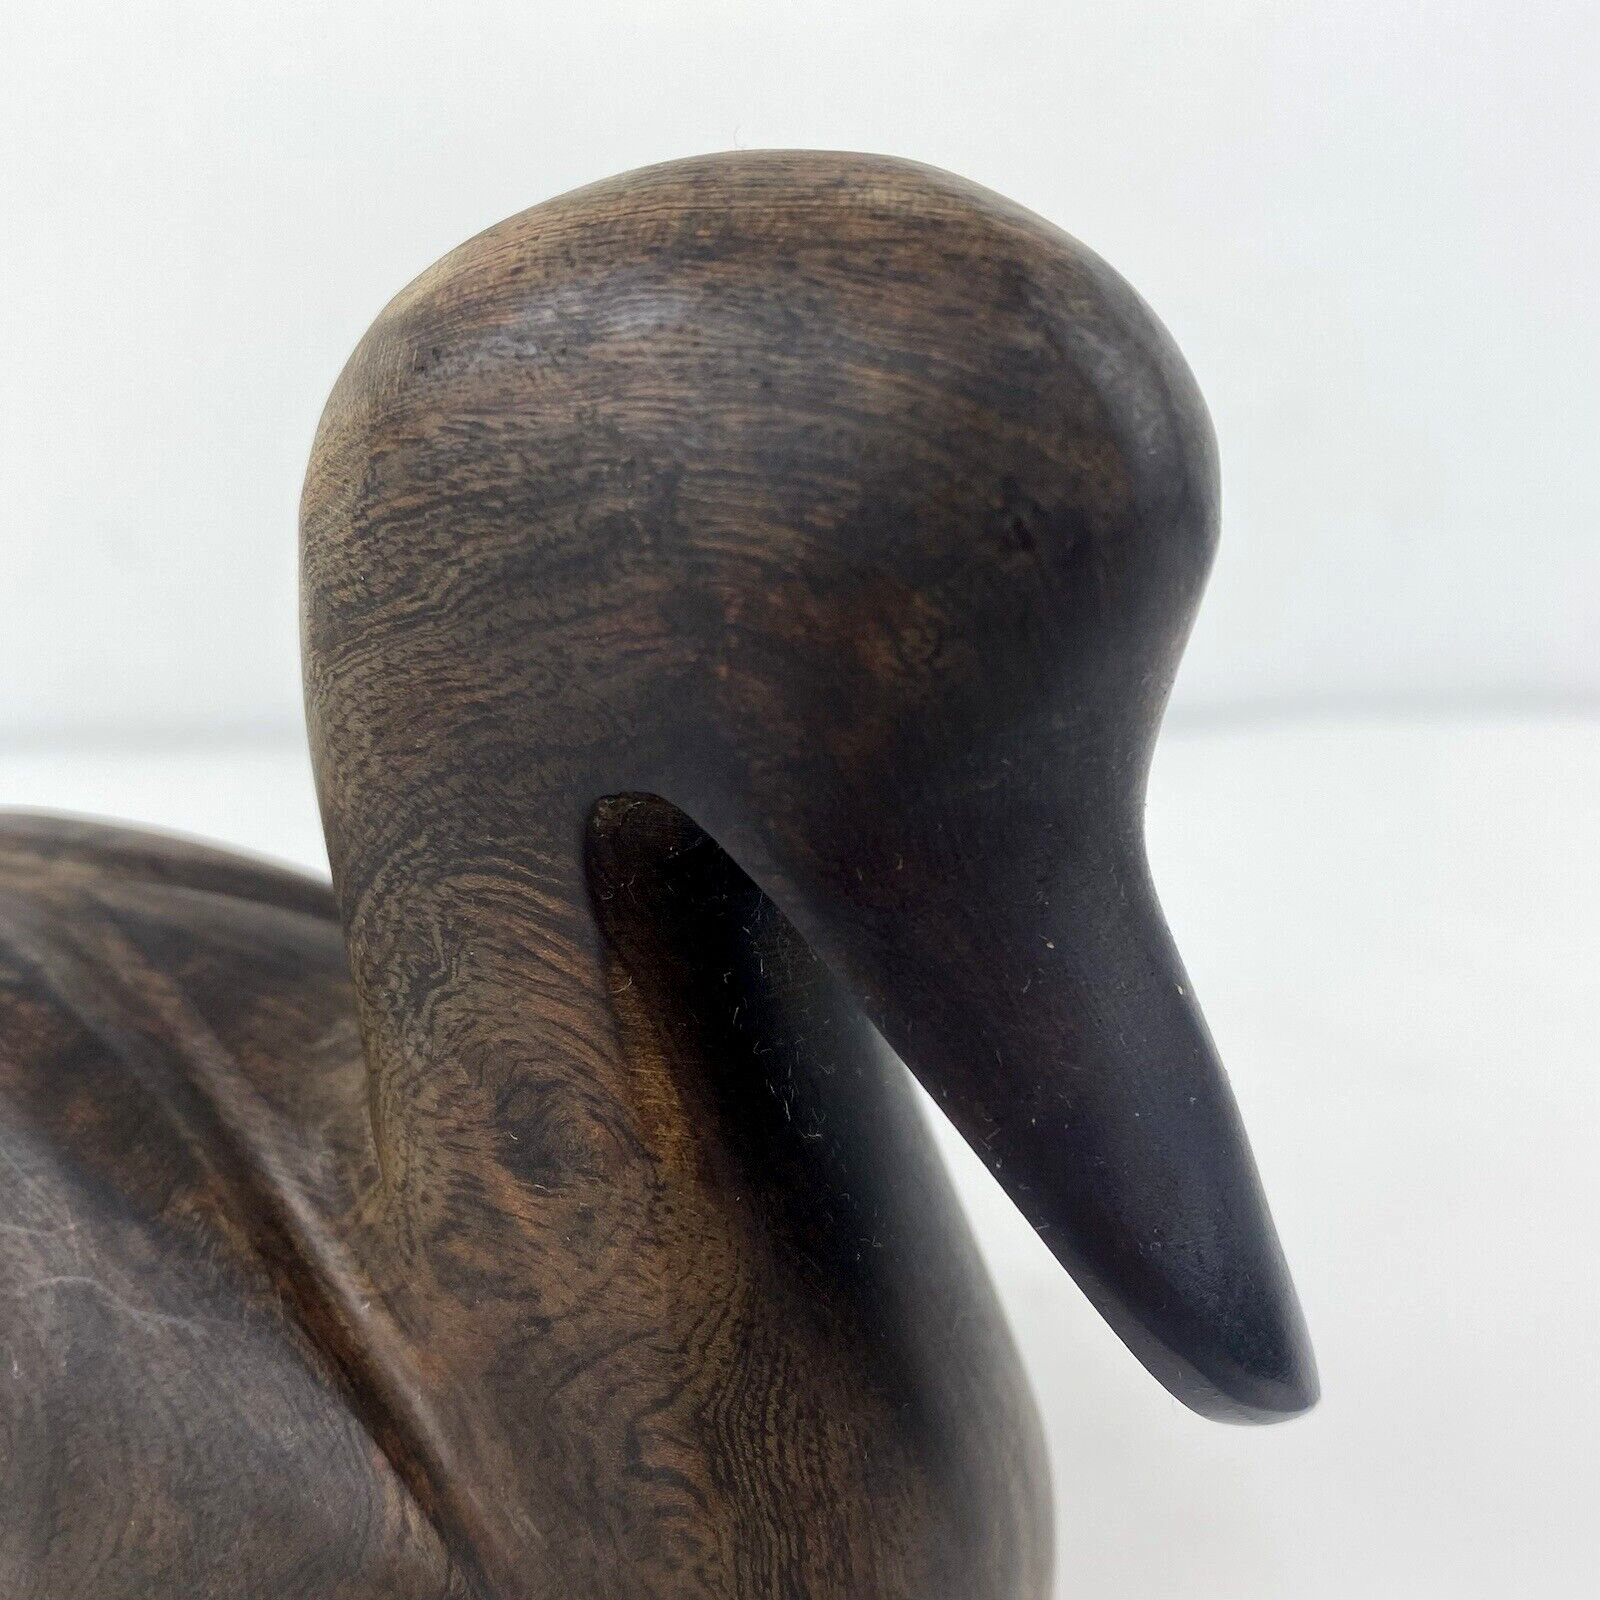 MAHOGANY WOOD DUCK Bird Hand Carved Figurine Paperweight Decoy Decoration Gift